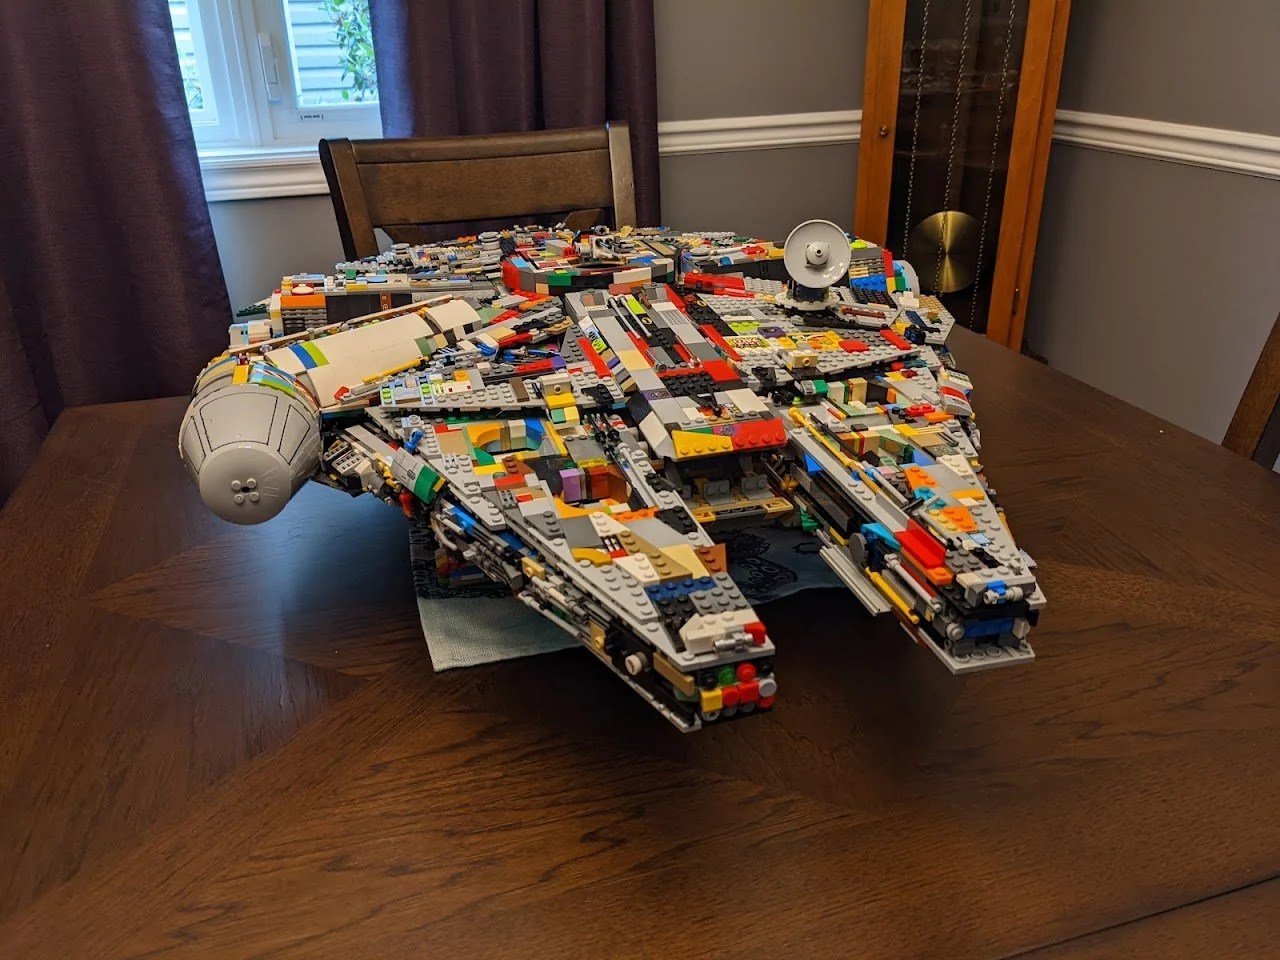 Lego Millennium Falcon made from spare parts